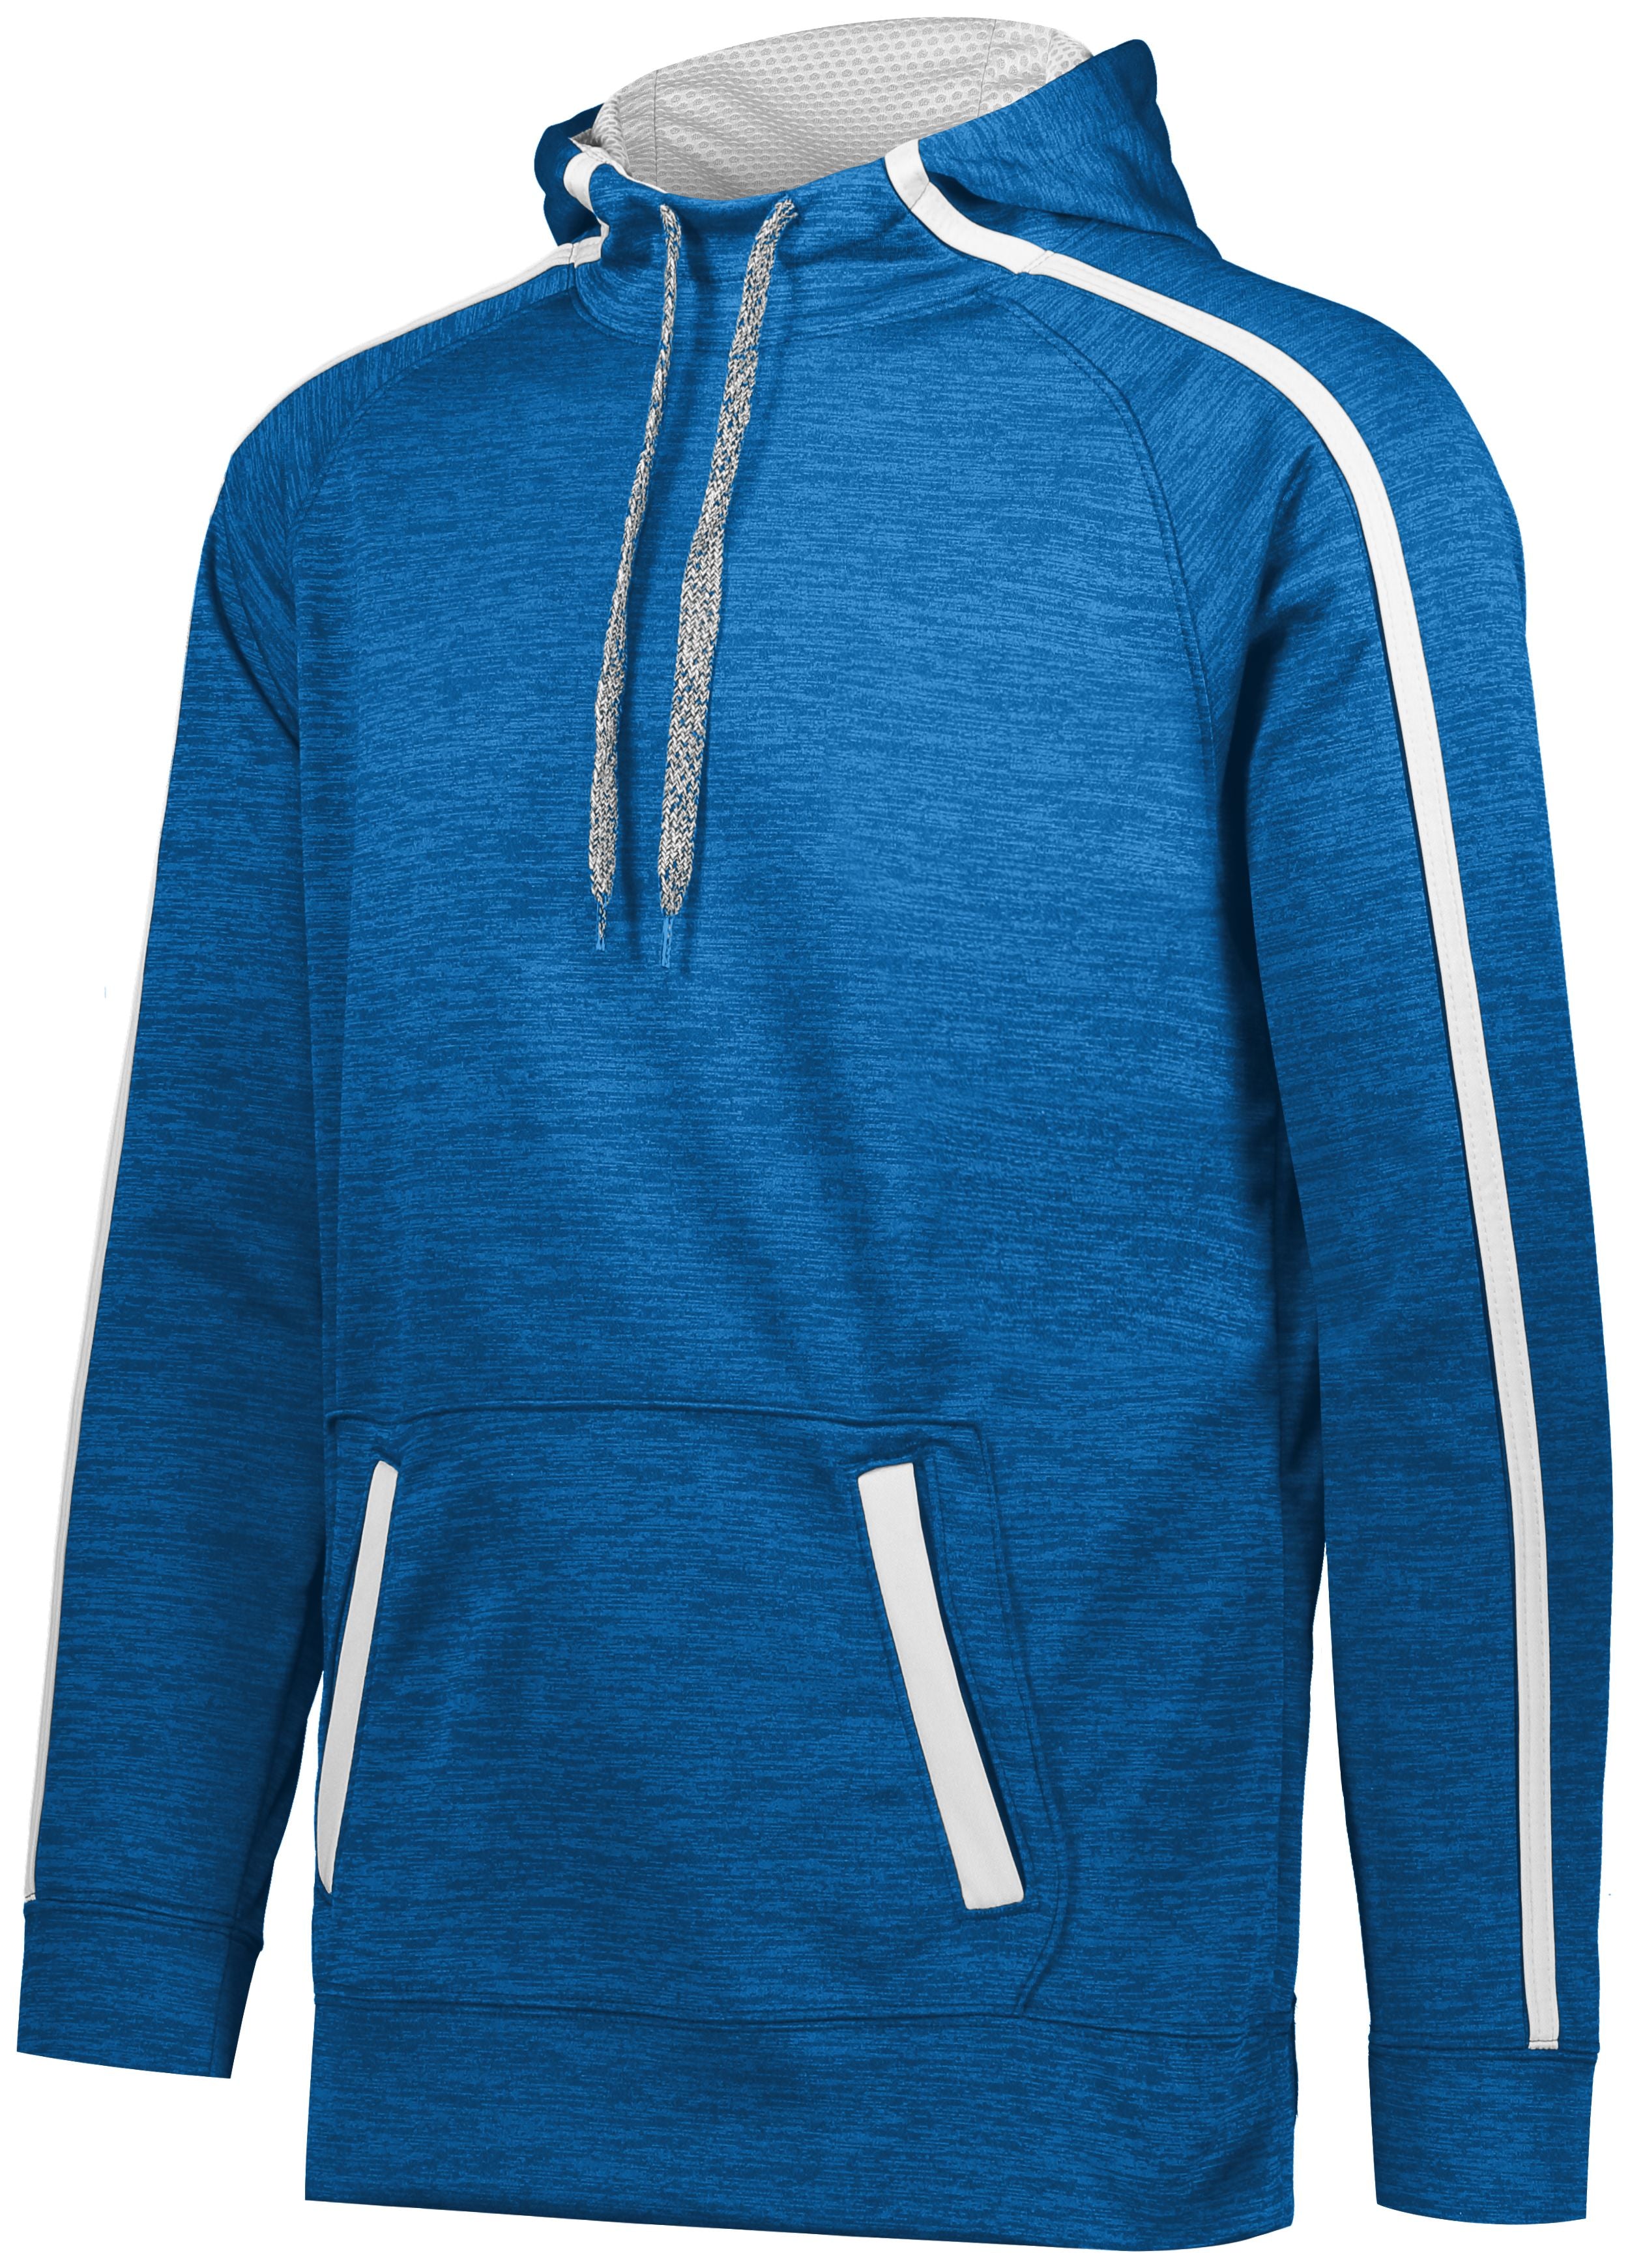 Augusta Sportswear Stoked Tonal Heather Hoodie in Royal/White  -Part of the Adult, Augusta-Products, Shirts, Tonal-Fleece-Collection product lines at KanaleyCreations.com